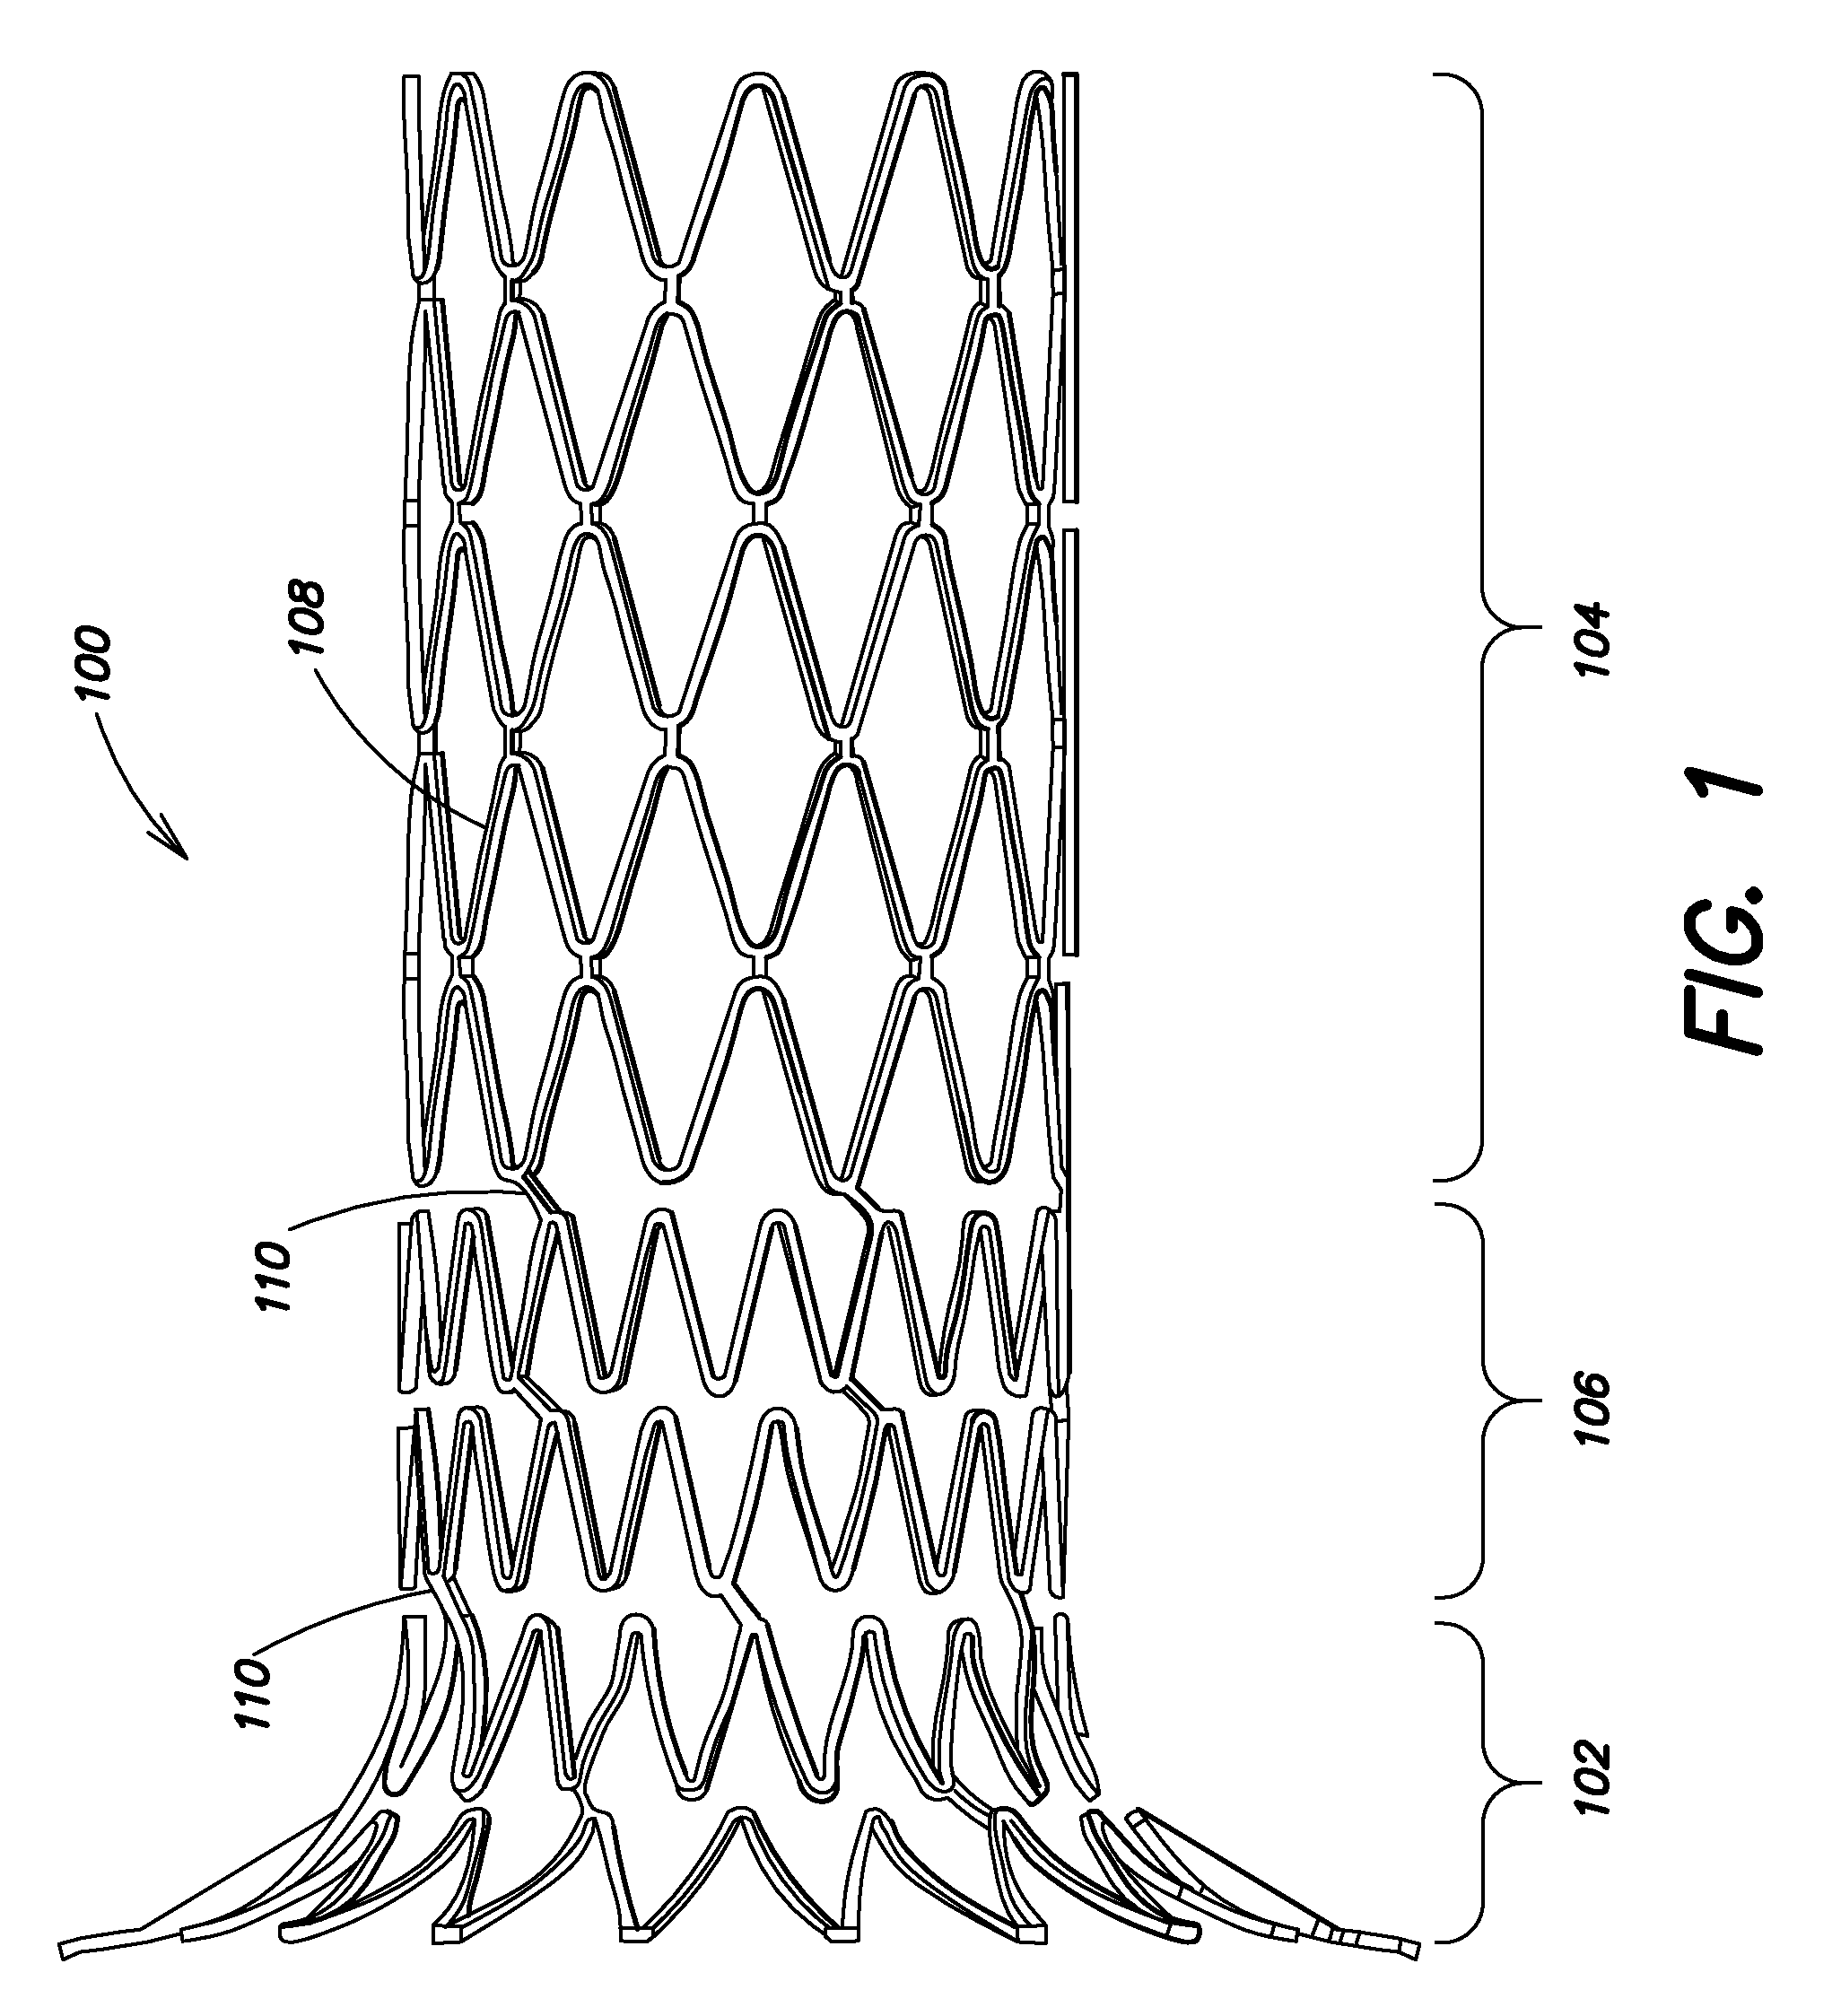 Delivery System With Profiled Sheath Having Balloon-Oriented Position